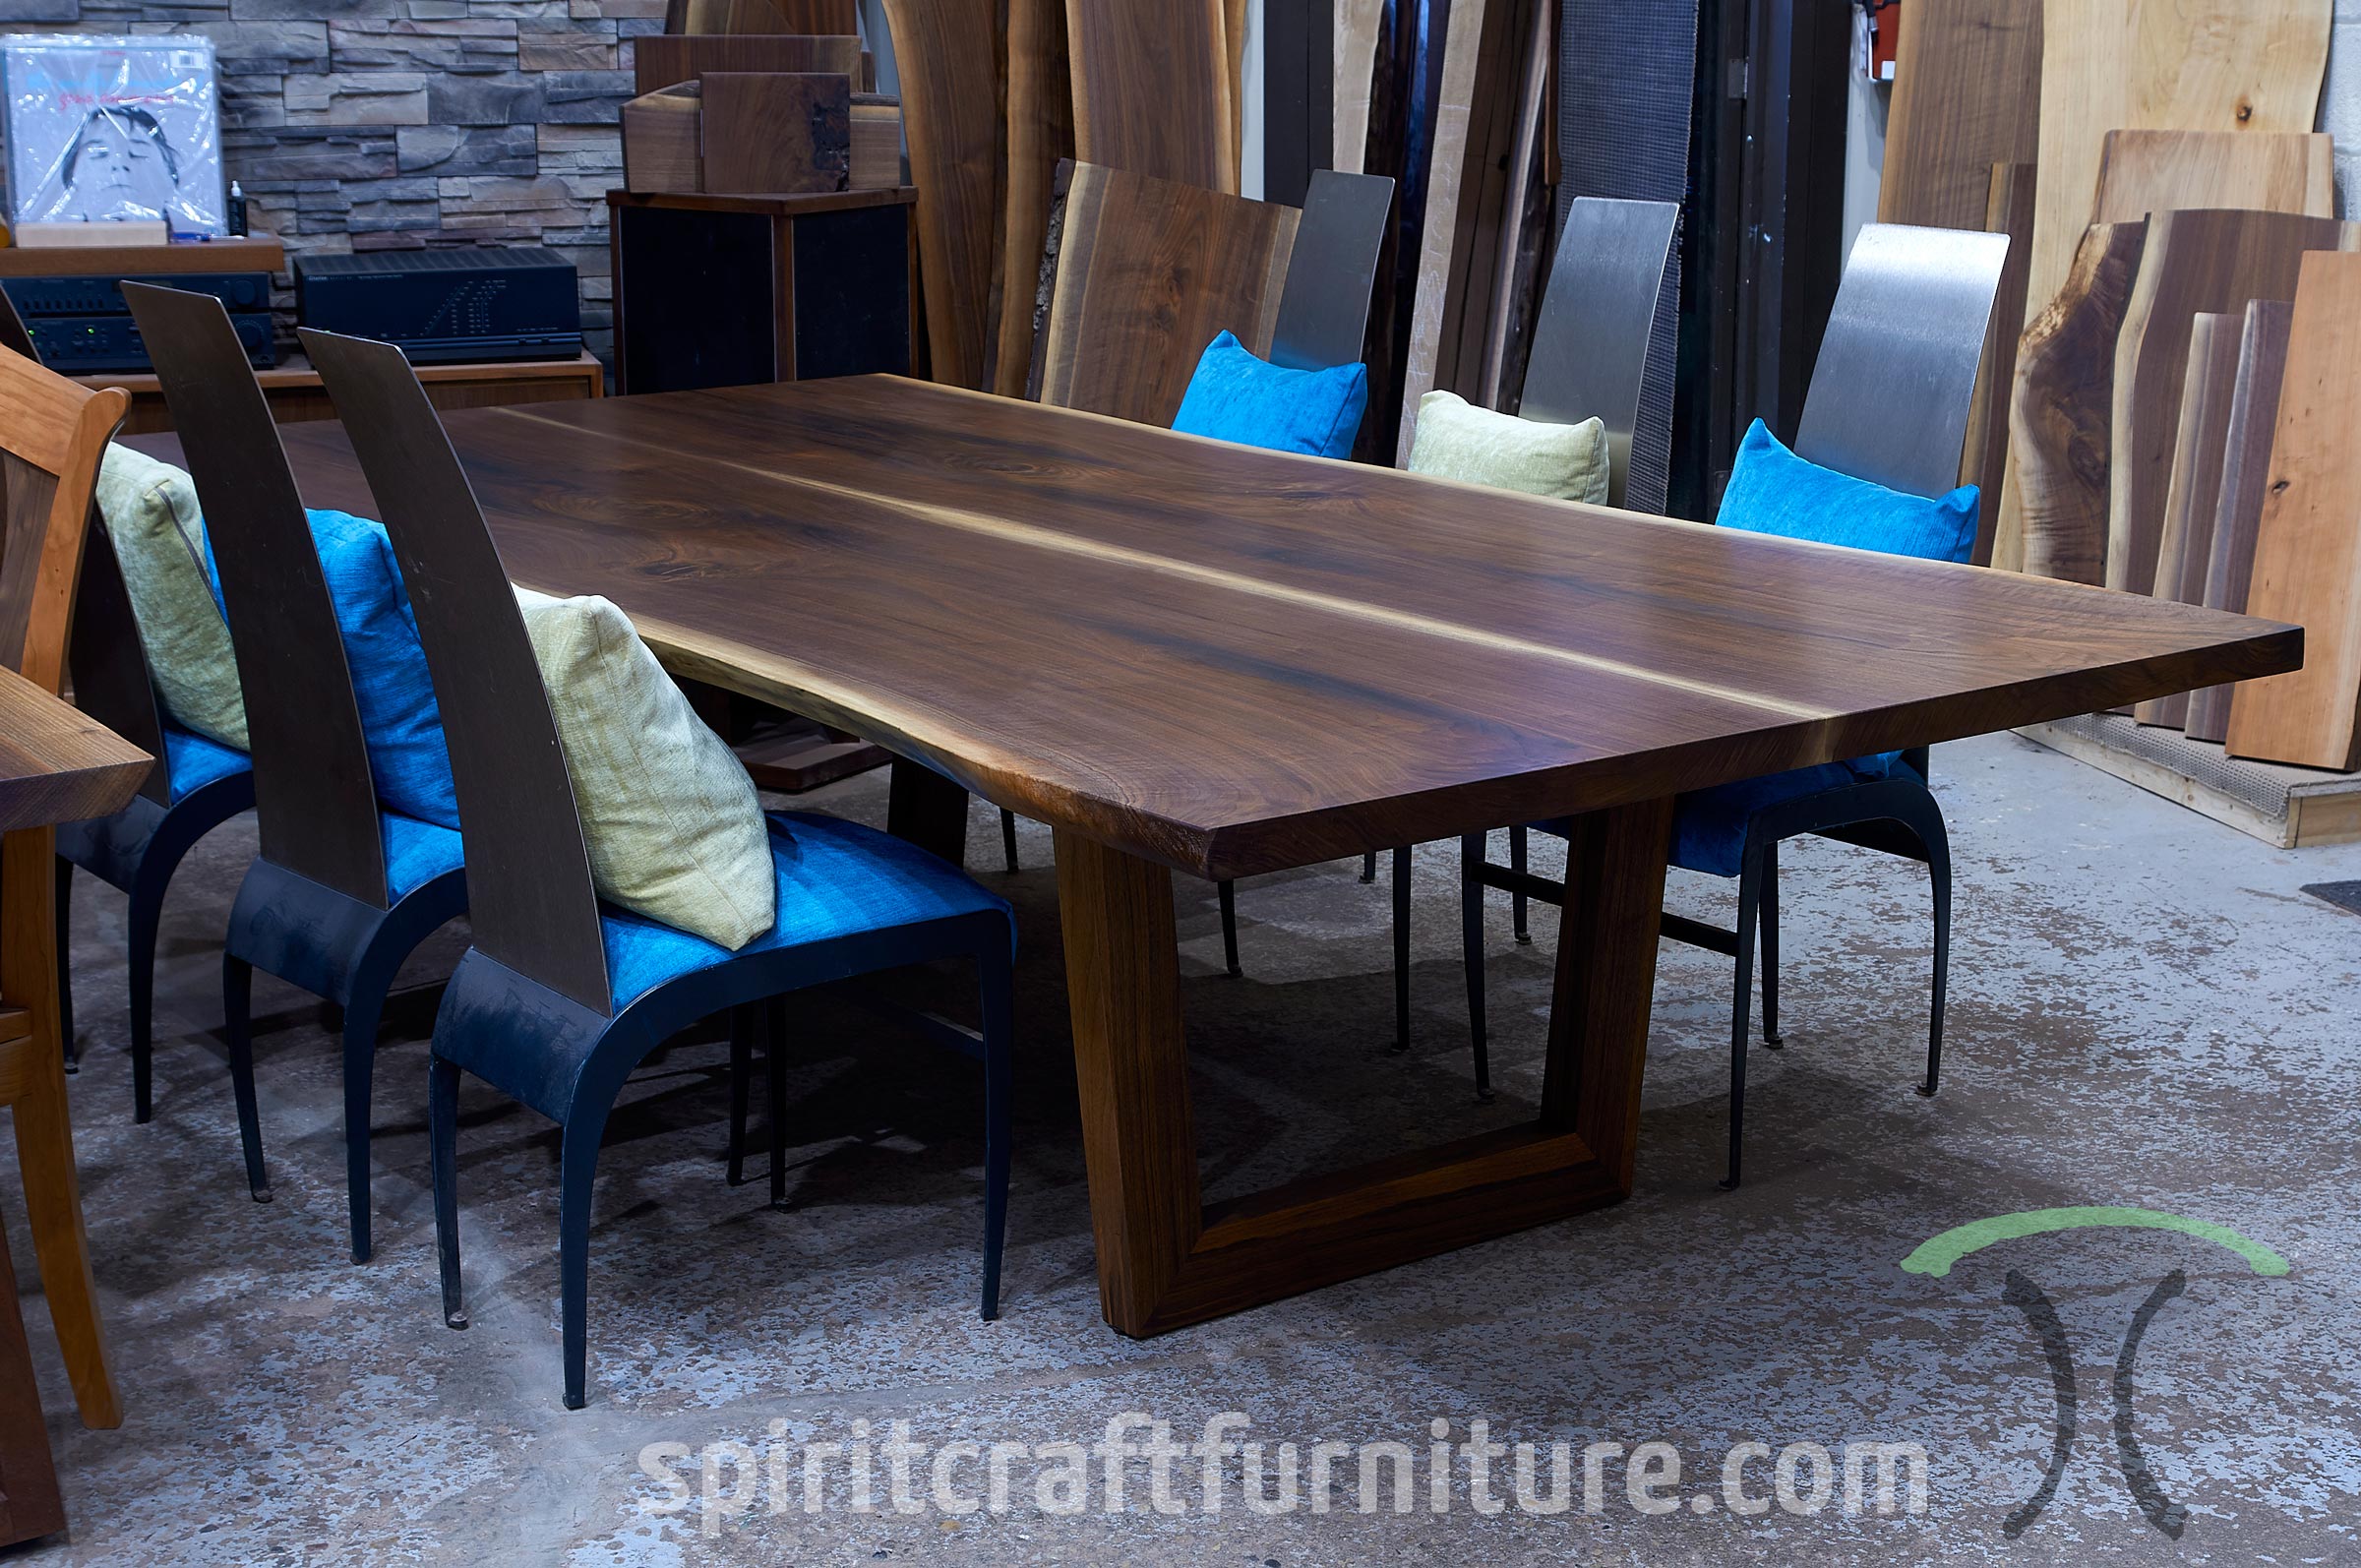 Live Edge Black Walnut dining table with spider base for California area client by Spiritcraft Furniture in East Dundee, Illinois.